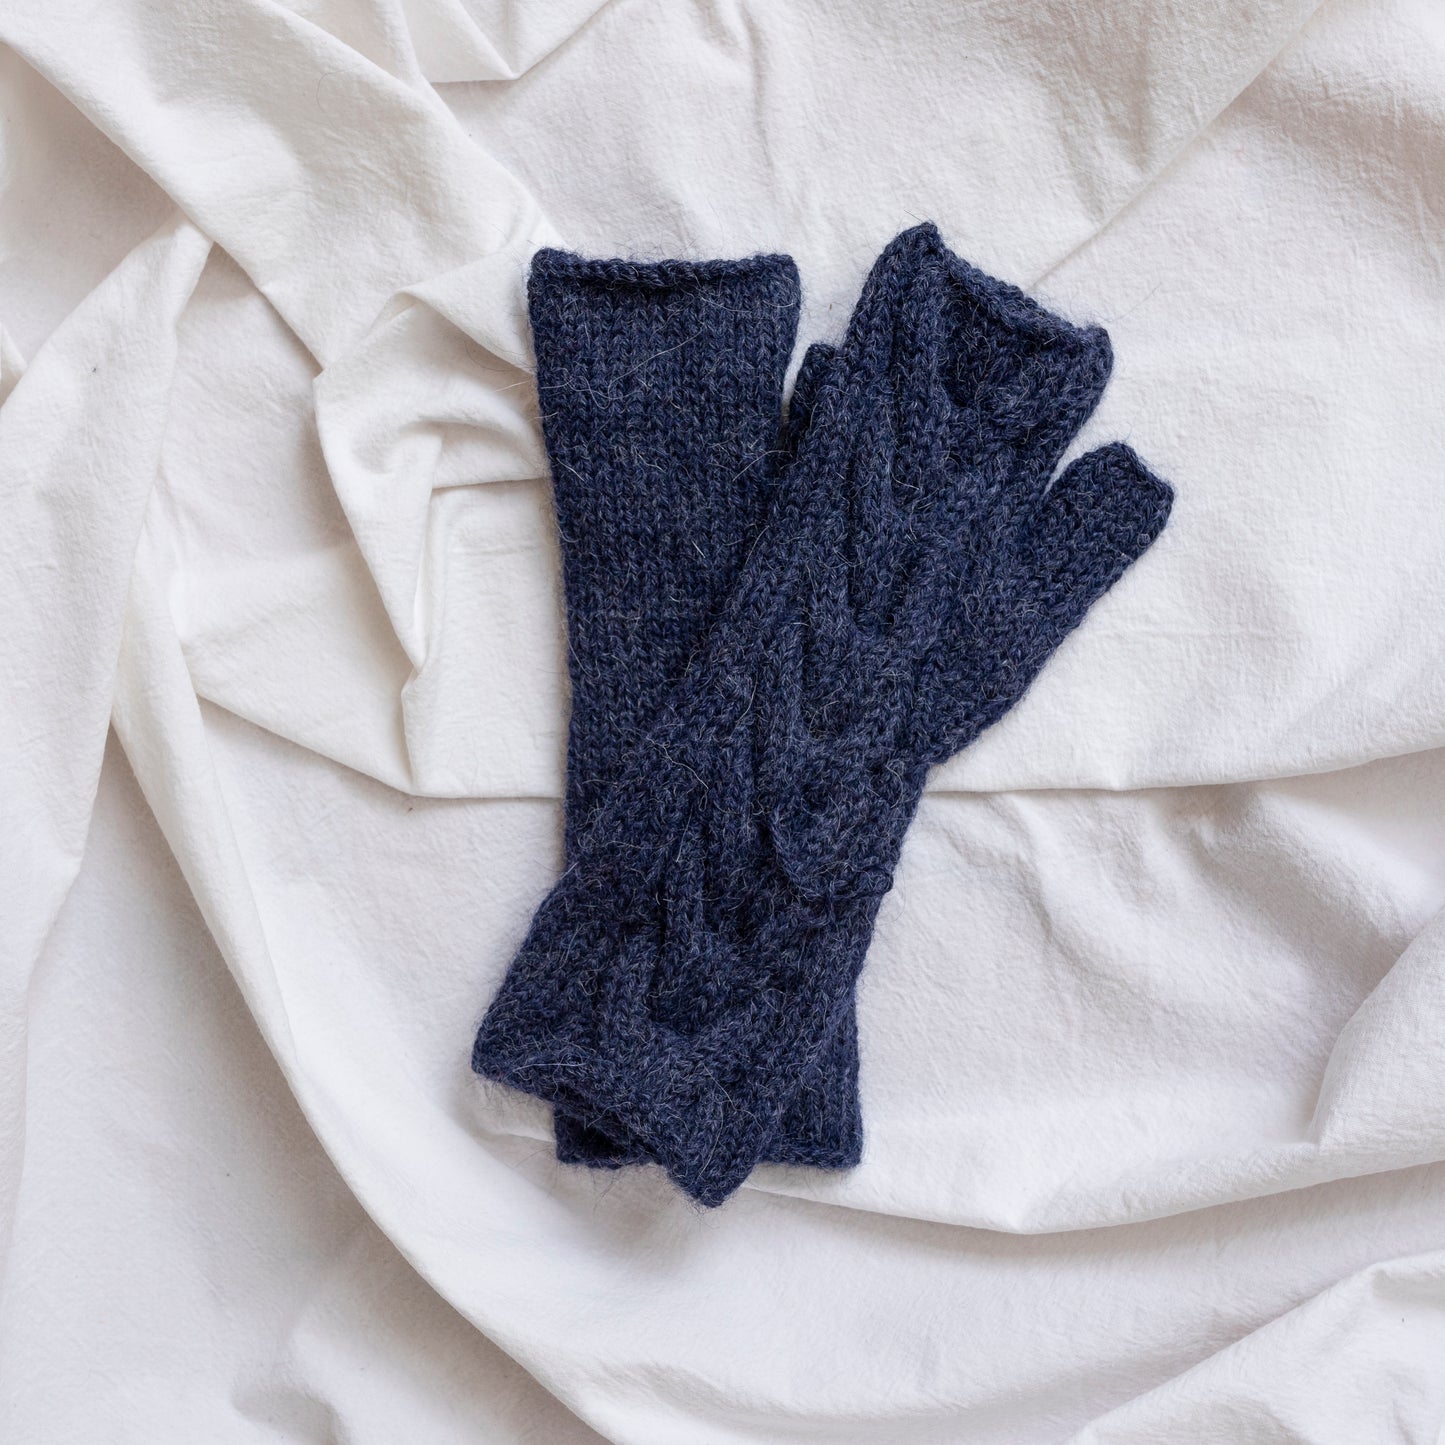 Dark blue coloured, super-soft and silky hand-knitted alpaca wool mittens.